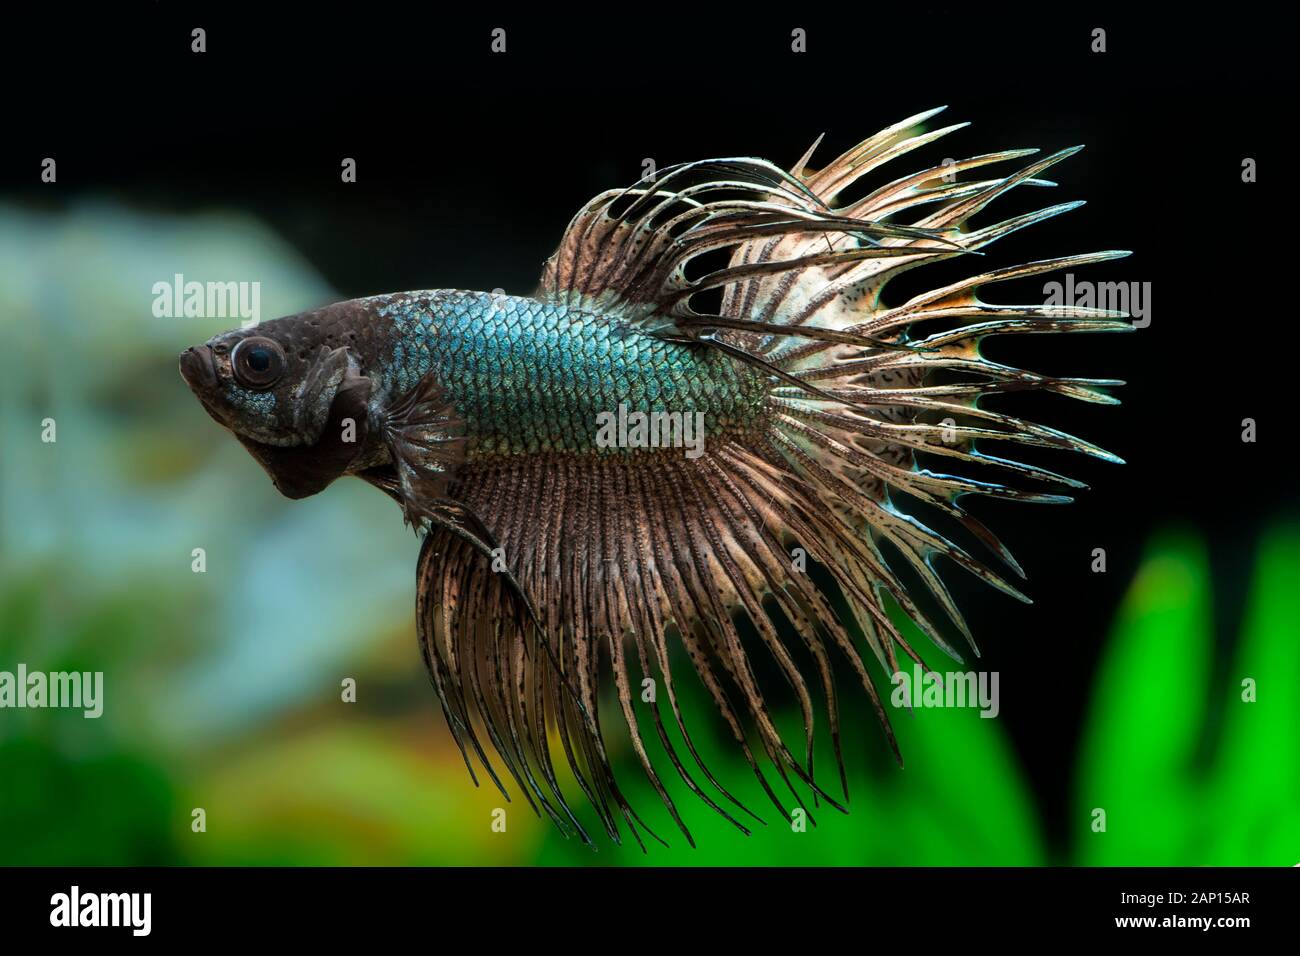 Siamese Fighter (Betta splendens Crowntail Copper). Adult fish under water. Germany Stock Photo